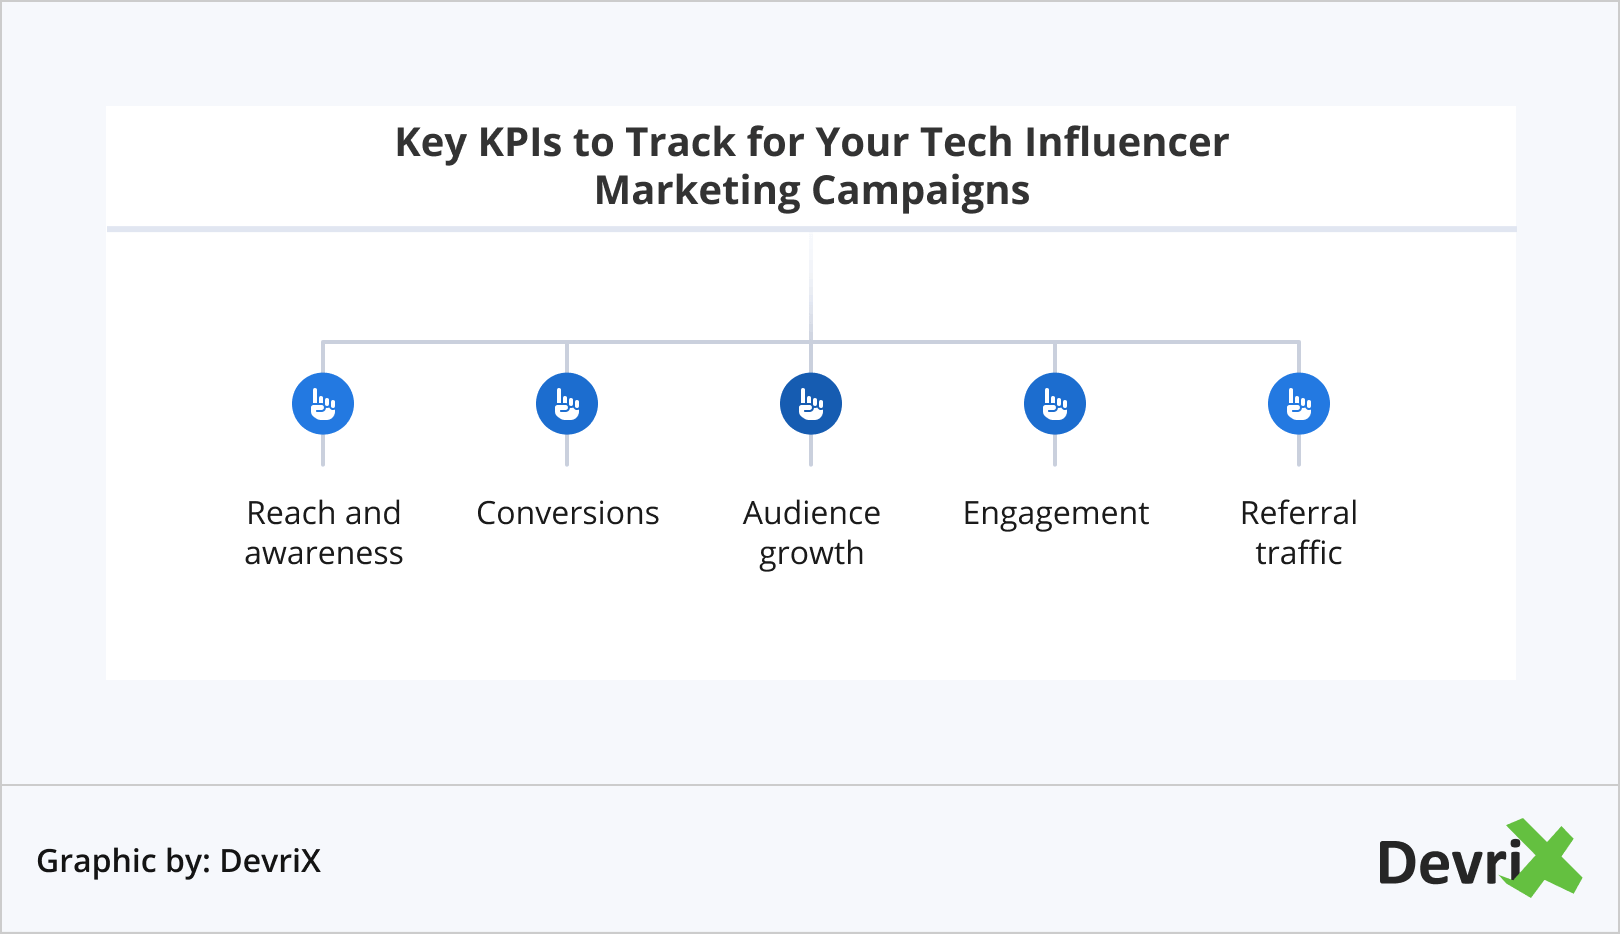 Key KPIs to Track for Your Tech Influencer Marketing Campaigns